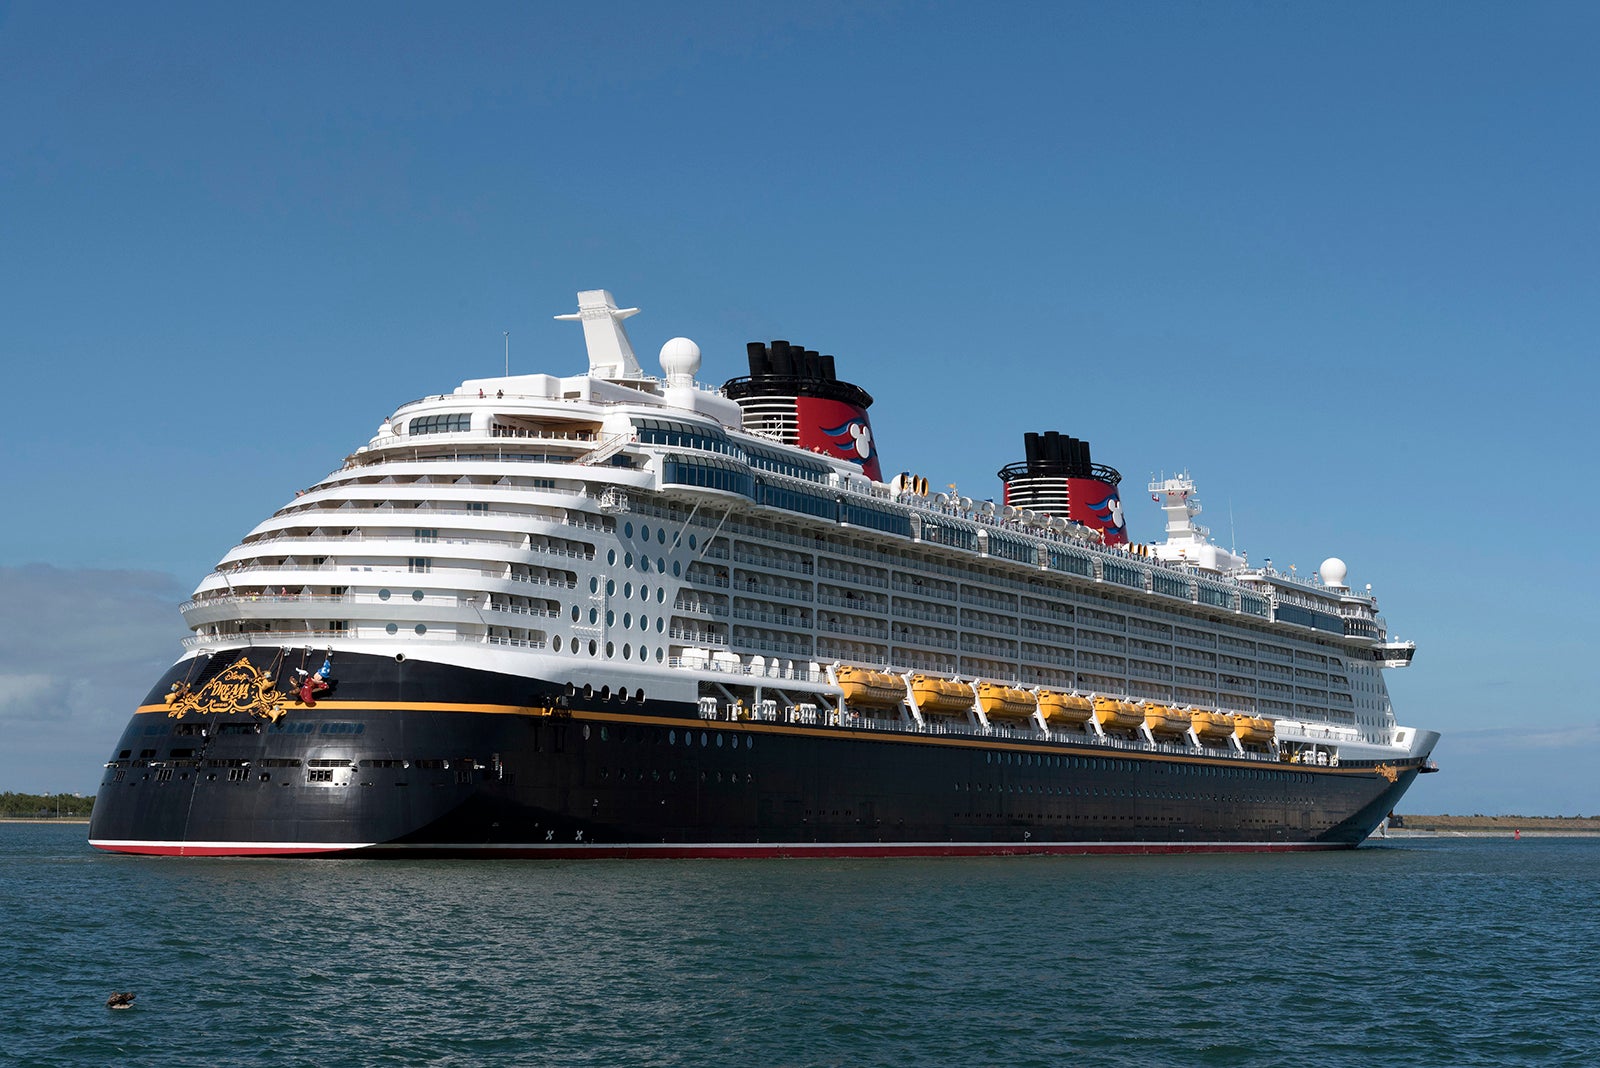 The Disney Dream cruise ship departing Port Canaveral Florida